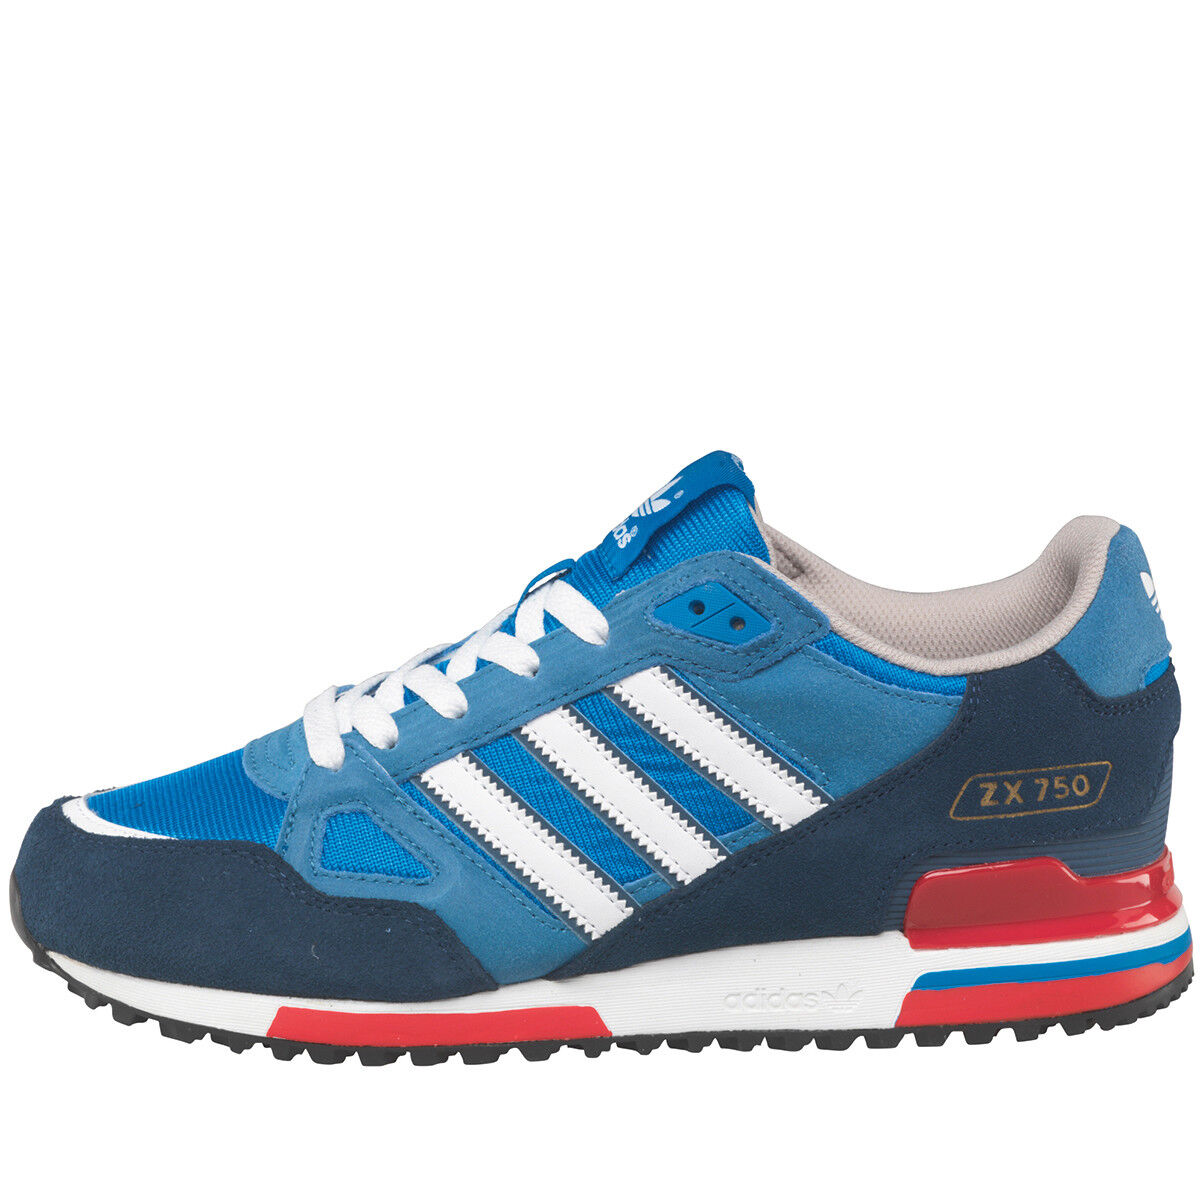 Microcomputer arc haircut adidas Originals Mens ZX 750 Trainers Bluebird/Blue/Navy/Red/White/ All  Sizes | eBay